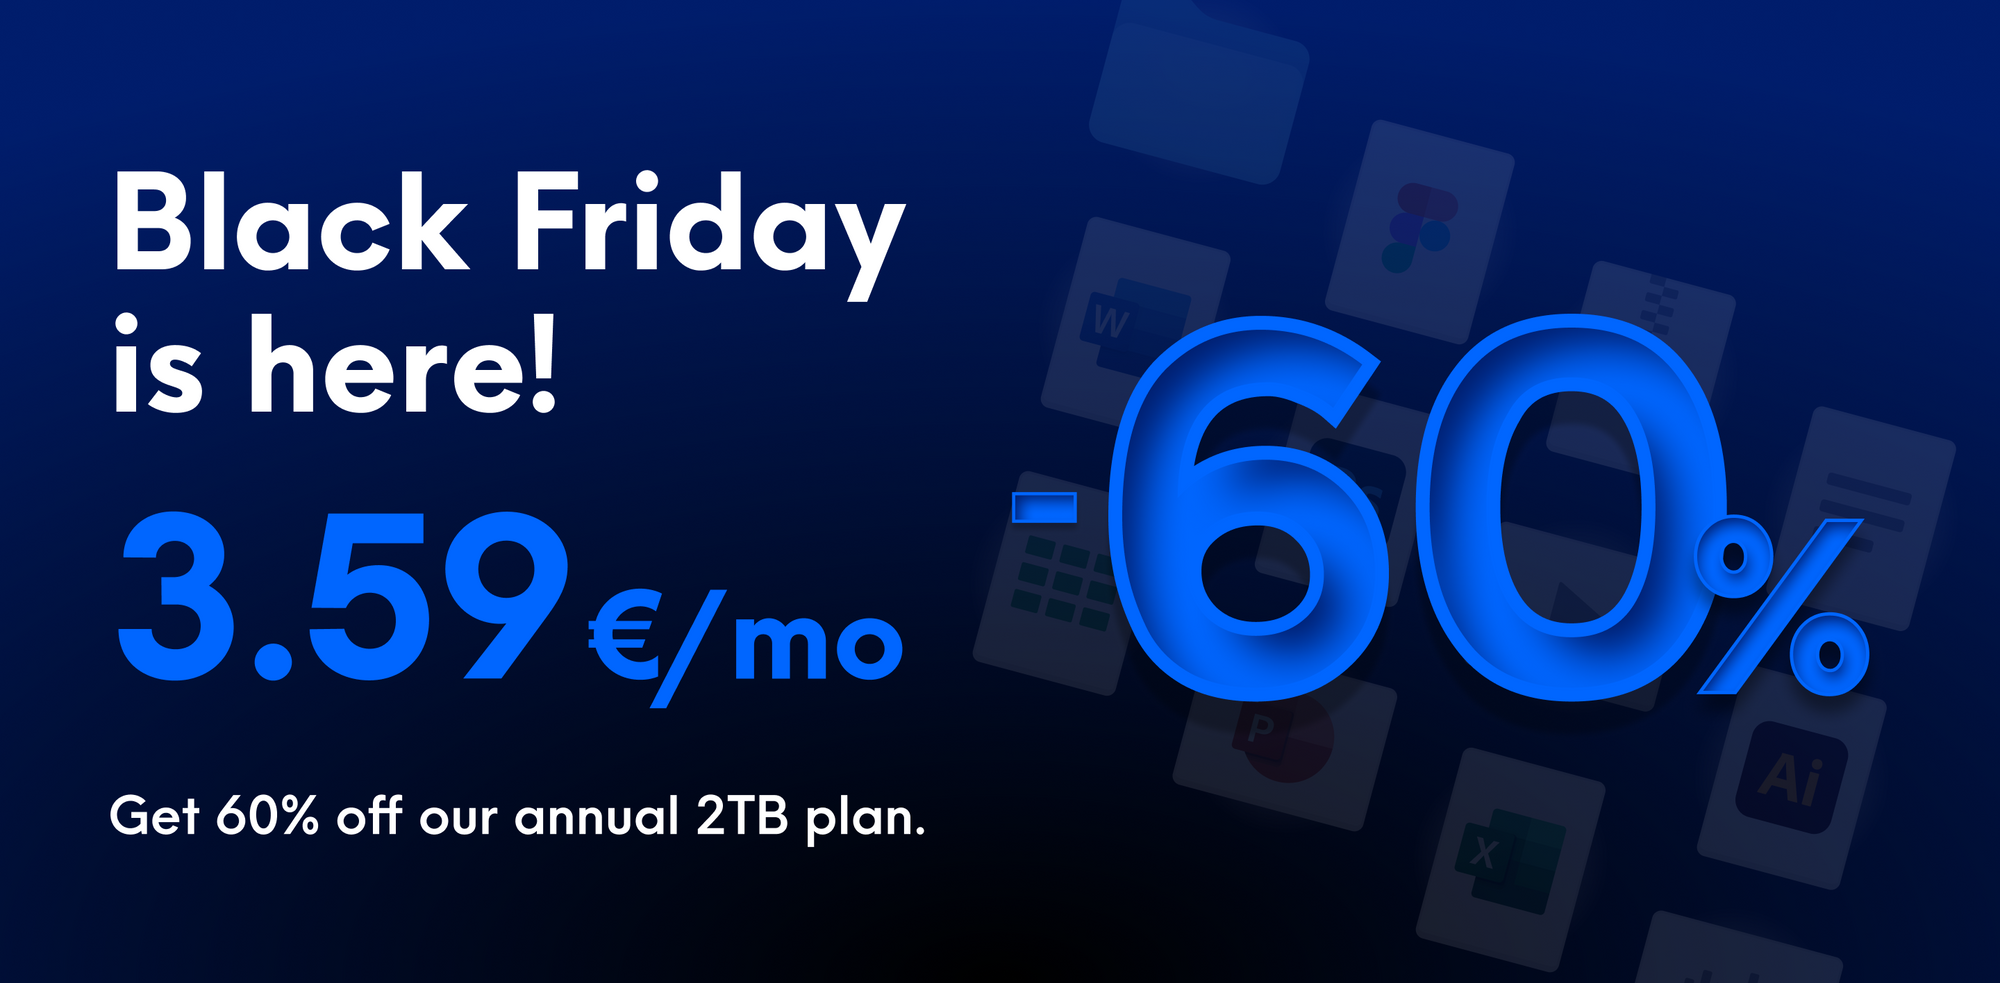 Internxt Black Friday offer allows you to have a 60% discount on the 2TB plan